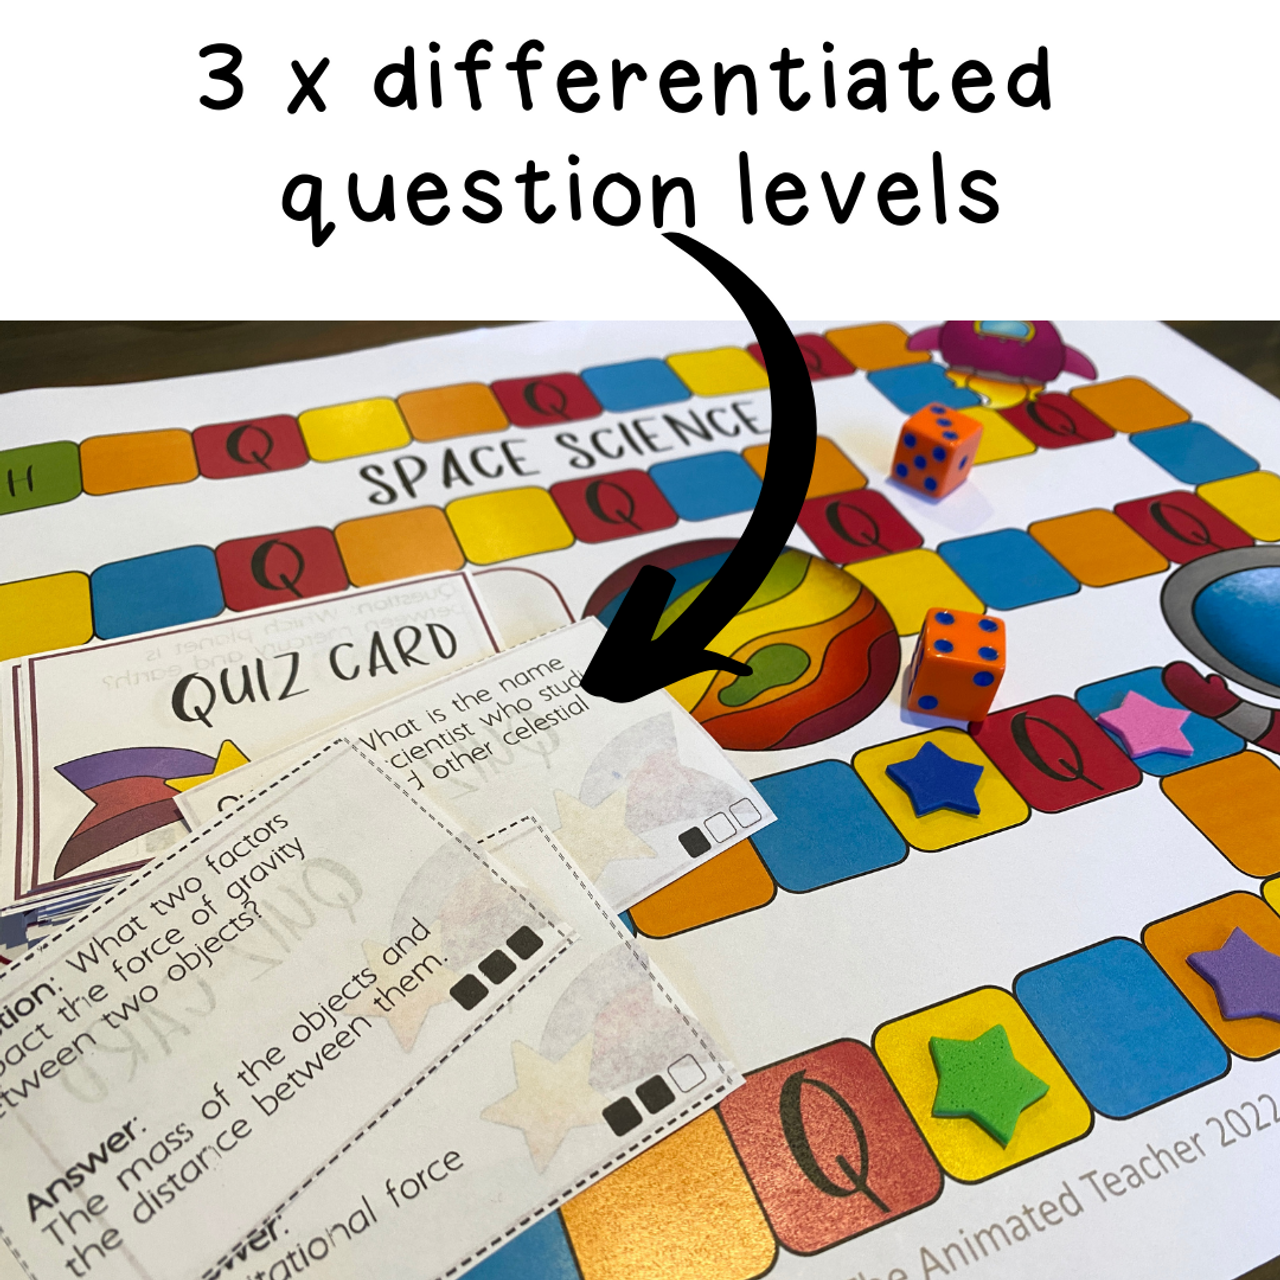 Space Science Board Game Printable Differentiated